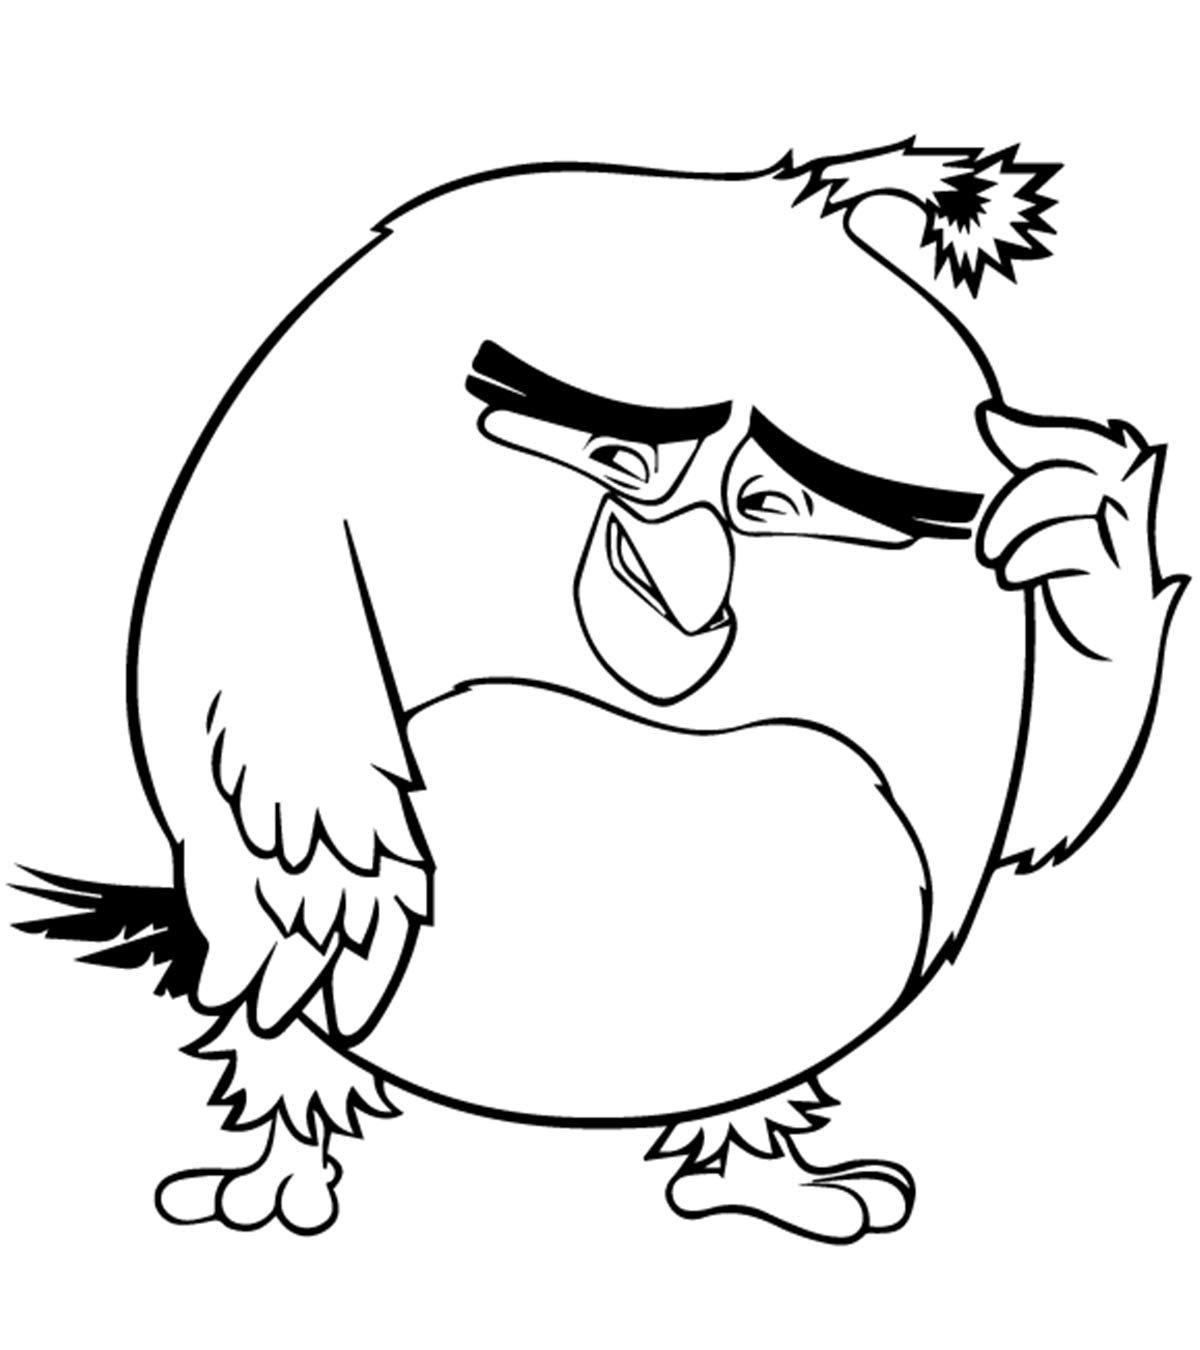 Love Bird Coloring Pages Top 40 Free Printable Angry Birds Coloring Pages Online